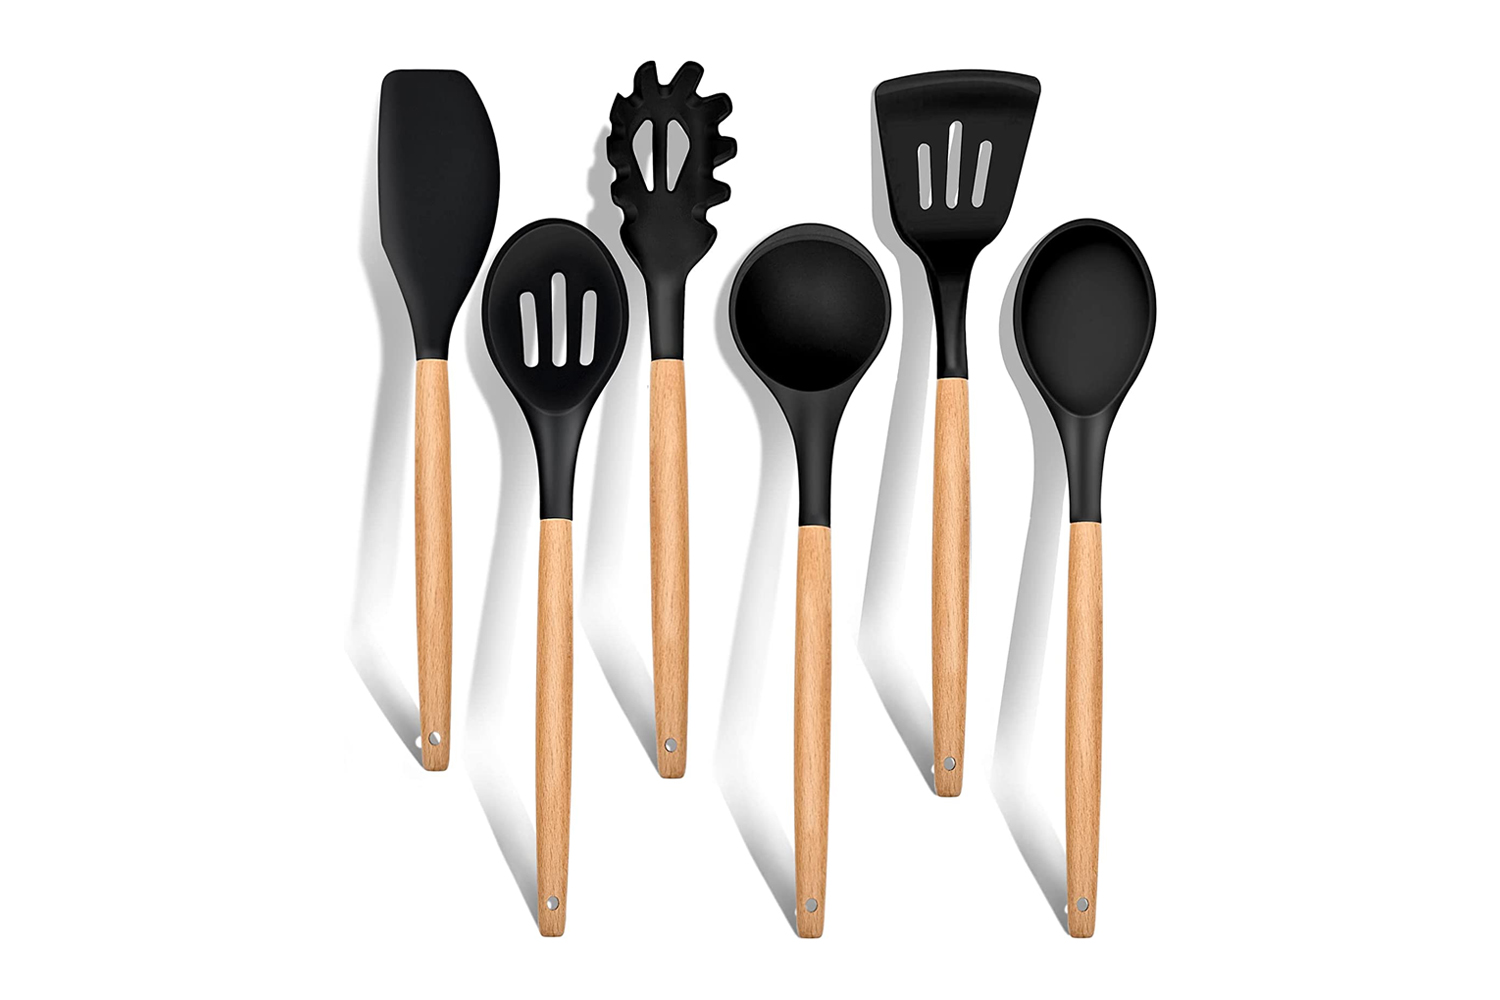 https://www.themanual.com/wp-content/uploads/sites/9/2021/09/e-far-6-piece-silicone-cooking-utensil-set-with-wooden-handle.jpg?fit=800%2C800&p=1